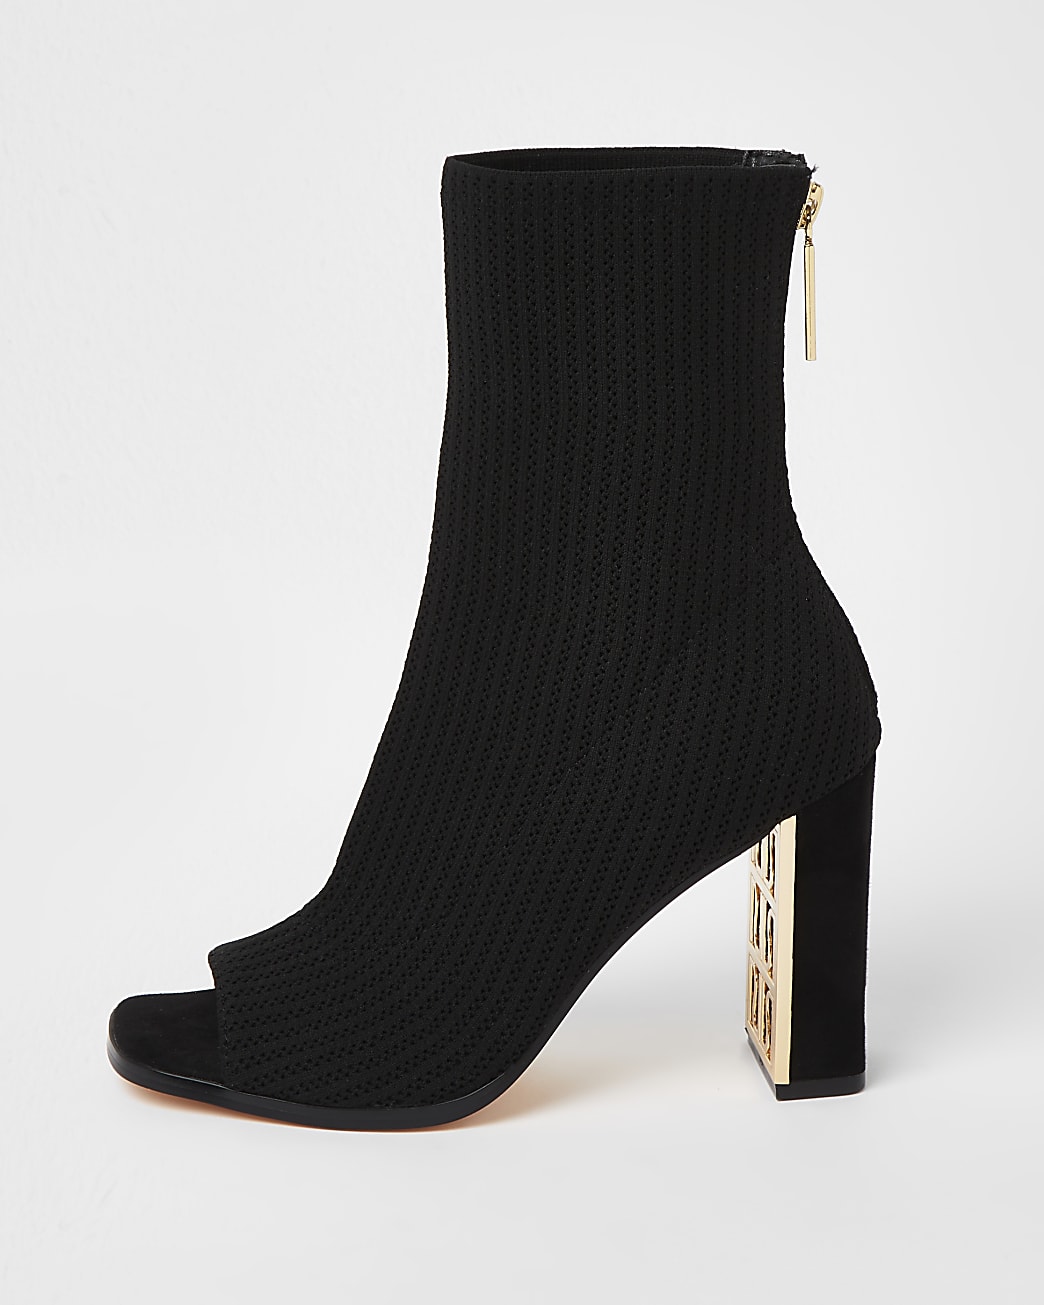 Black knitted open toe shoe boots